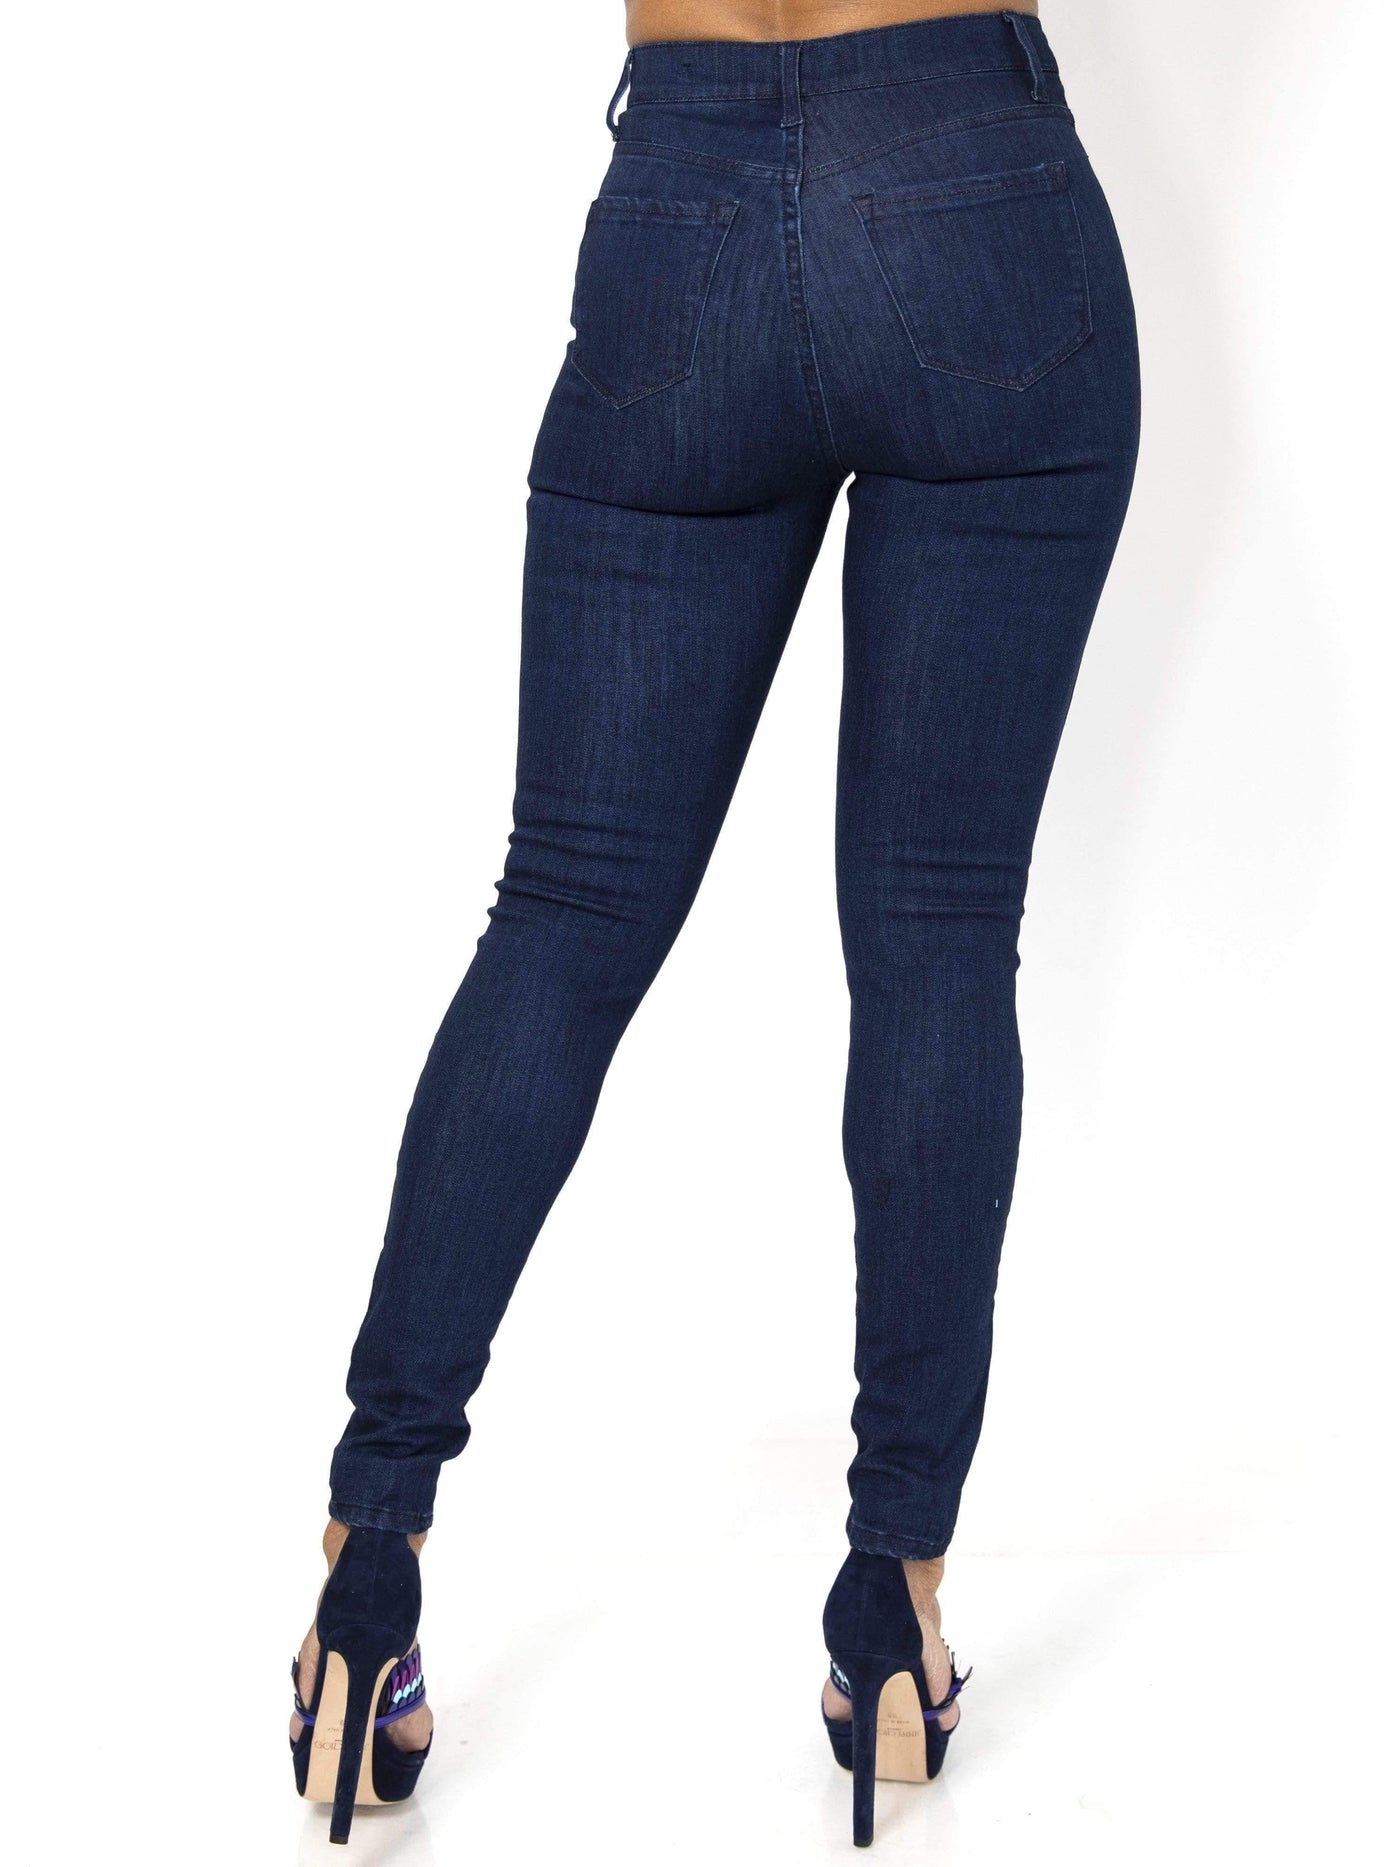 Like Navy | Super Stretchy Skinny Jeans - Statement Piece NY _tab_size-chart, basic, Blossom 2021, Blue, Bottom, Bottoms, Brooklyn Boutique, casual, chic, Dark wash denim, Denim, Fall, jeans, Long Pants, Misses, not clearance, Ships from USA, skinny fit, skinny pants, SPNY Exclusive, statement, statement piece, Statement Piece Boutique, statement piece ny, Statement Pieces, Statement Pieces Boutique, Women's Boutique Pants